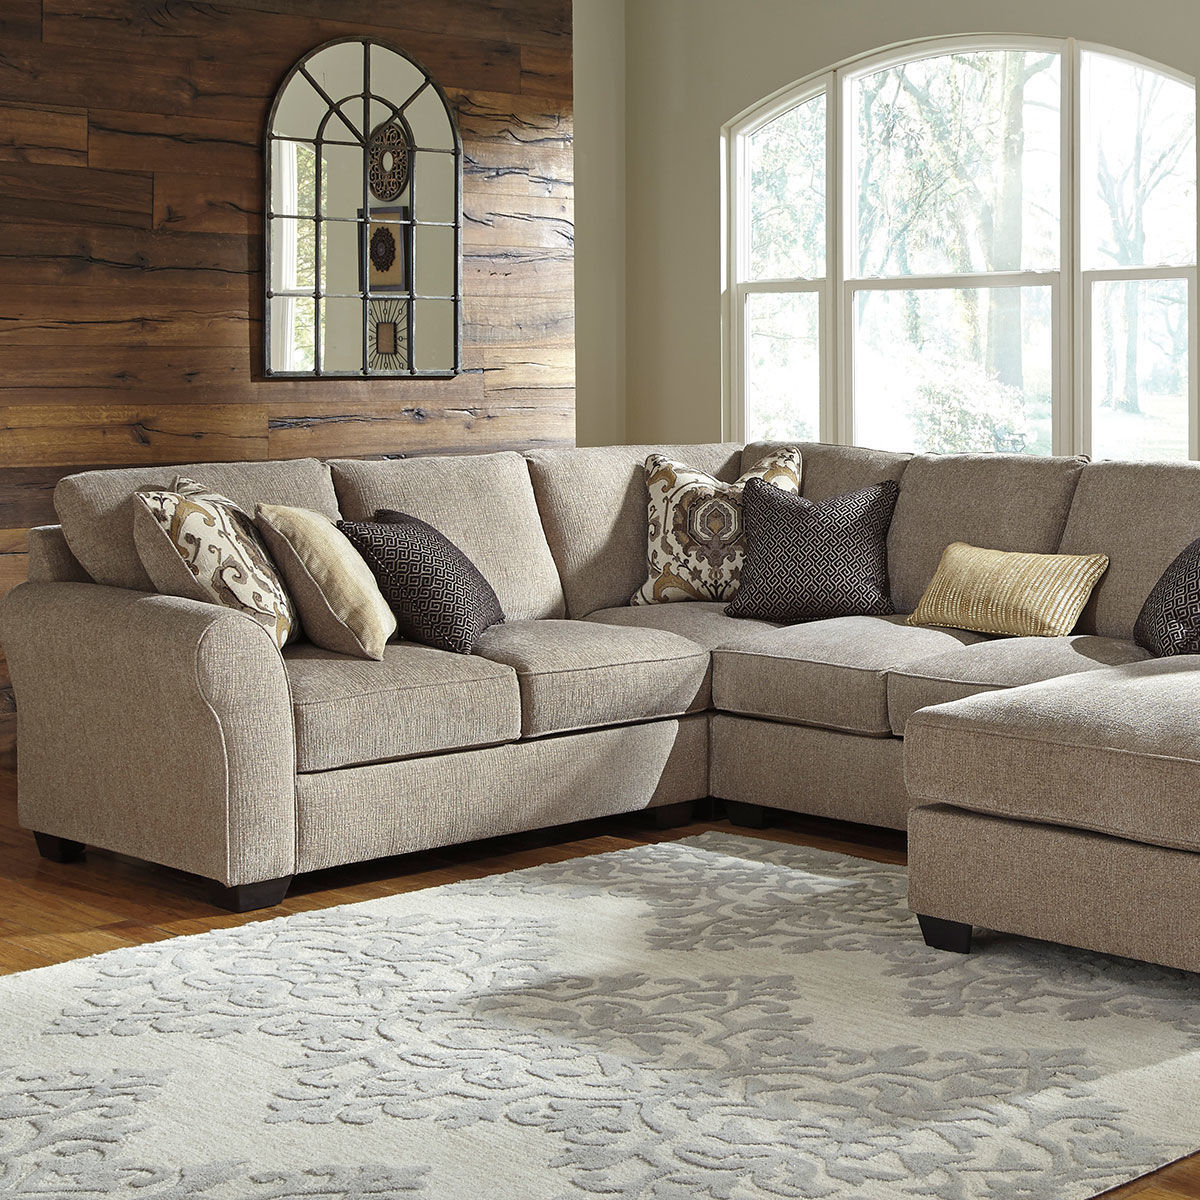 ROMAN 4 PC CHAISE SECTIONAL